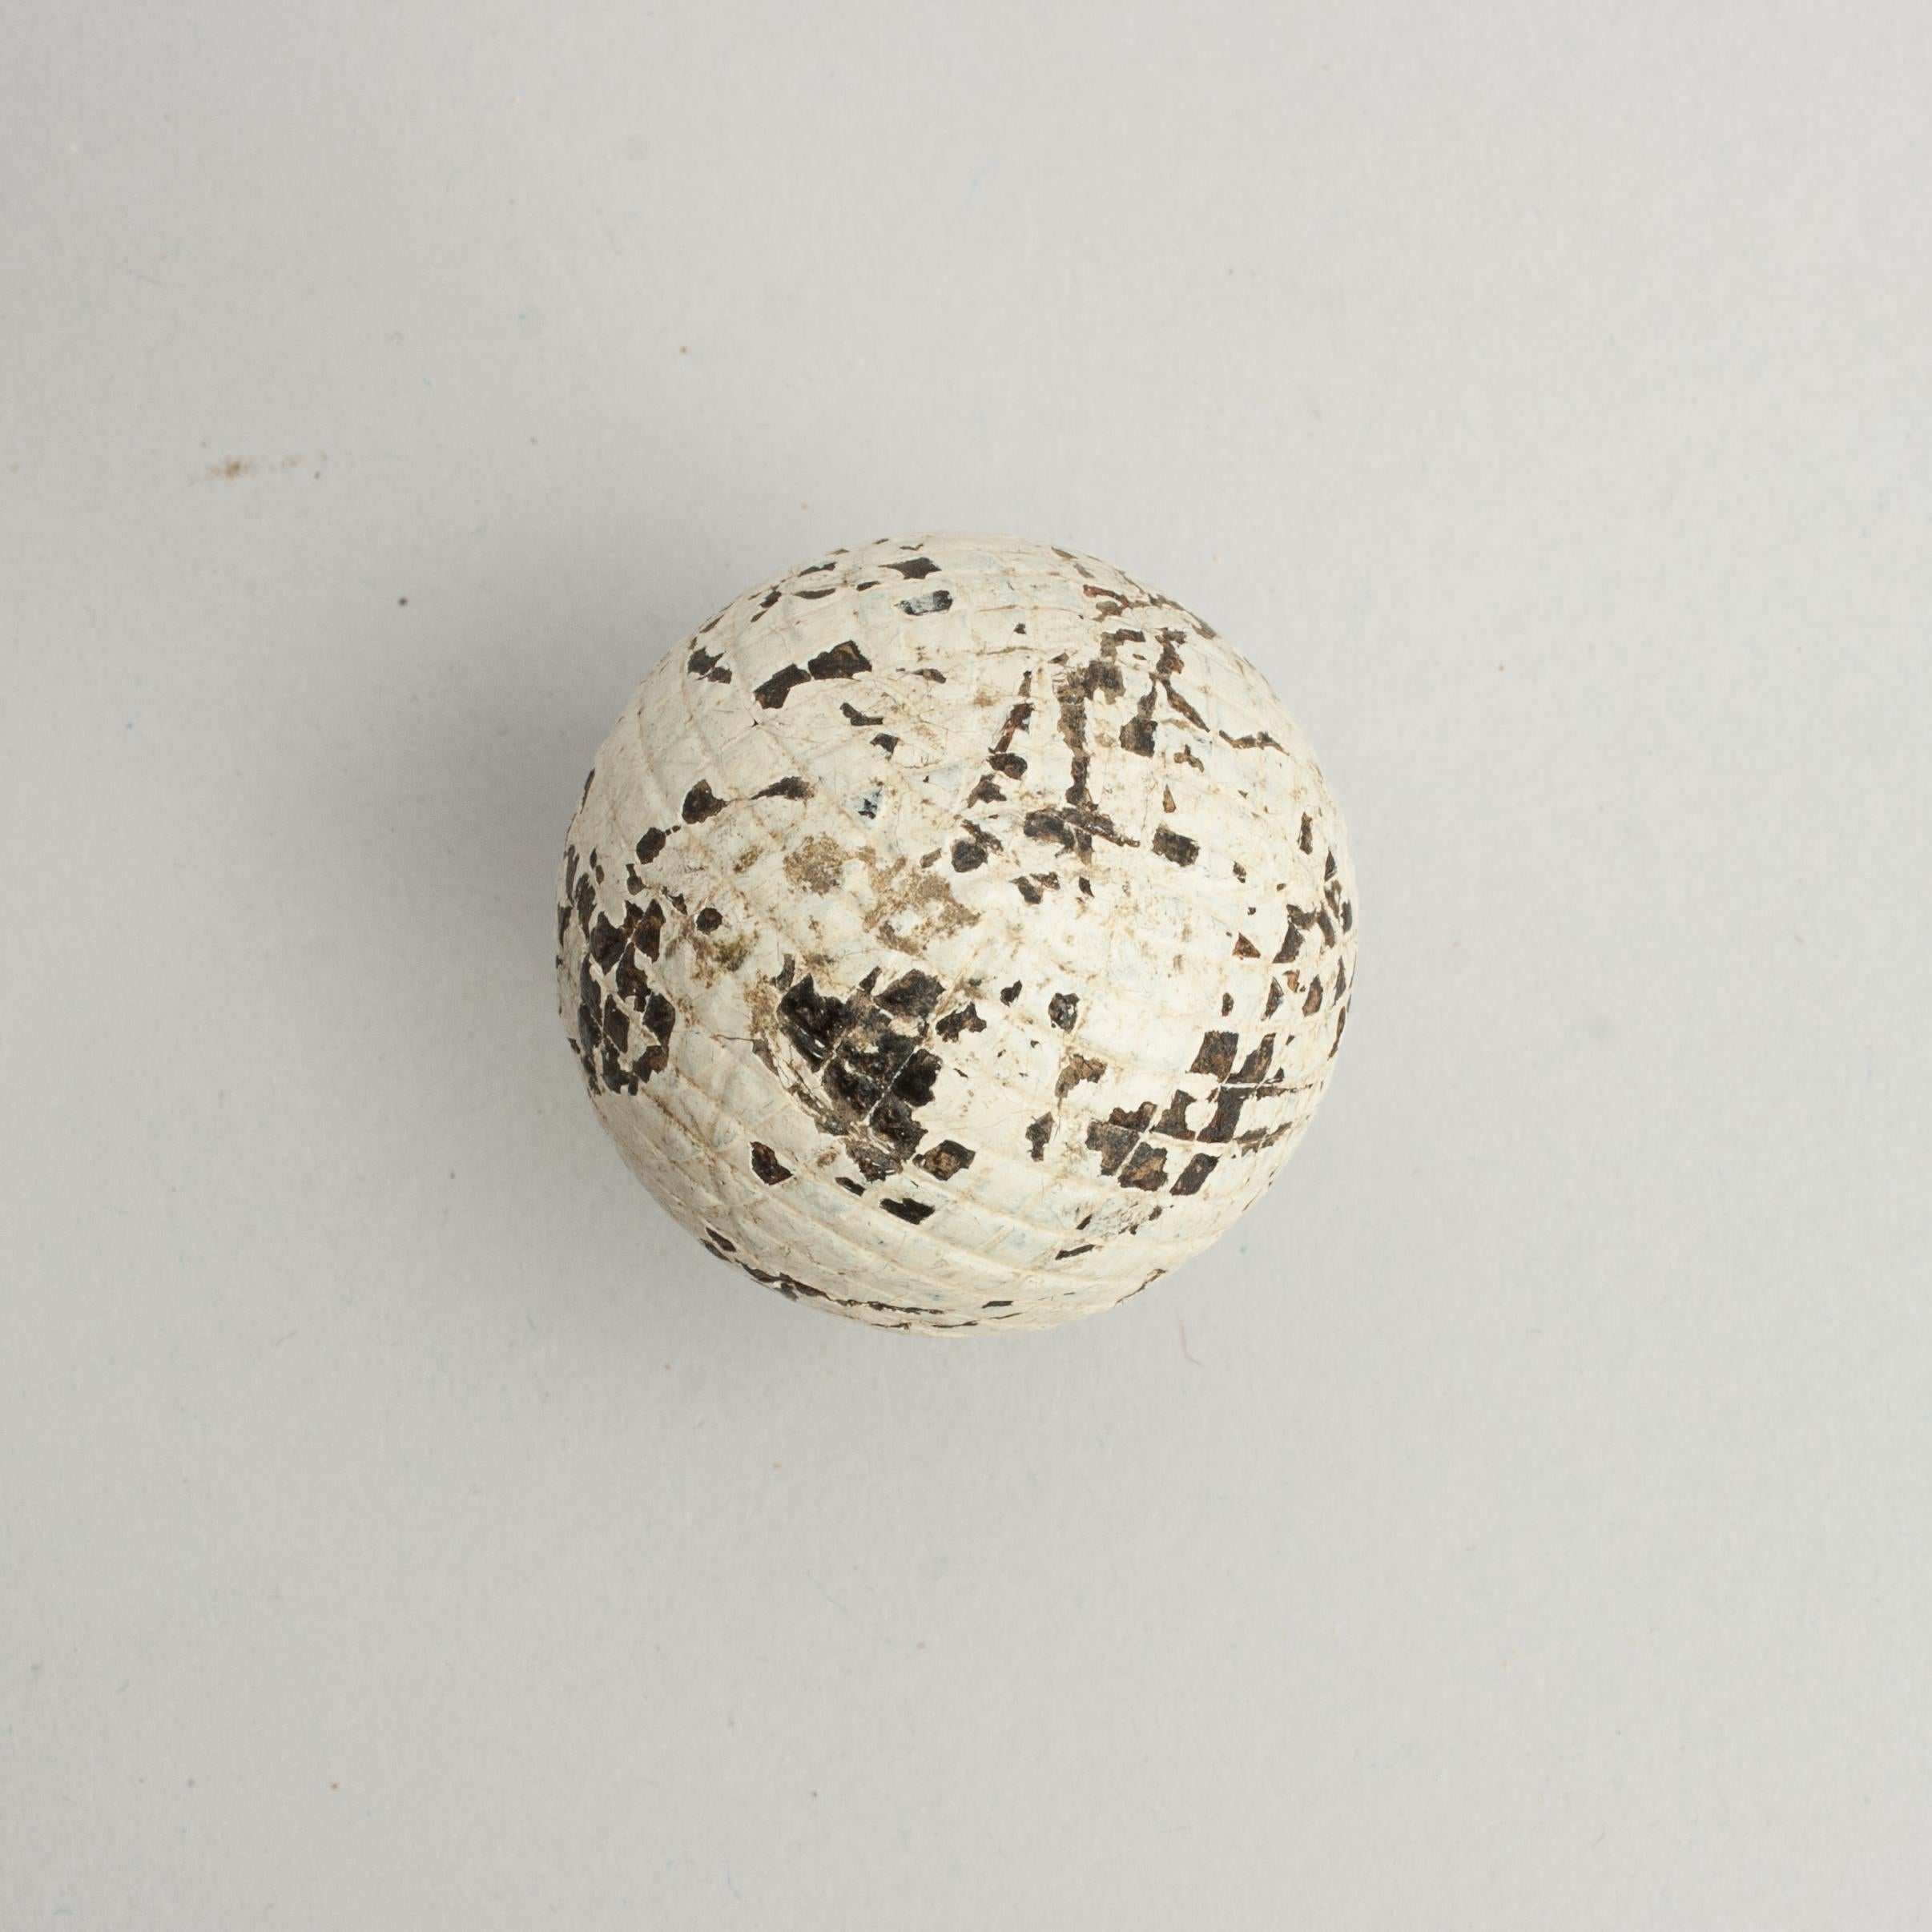 Unnamed Mesh Pattern Gutty Golf Ball.
A moulded solid square mesh patterned gutta percha golf ball in used condition. The 1890's Gutty ball still has the lots of the original white paint.

The ball is approximately 1 11/16 inch in diameter (4.3